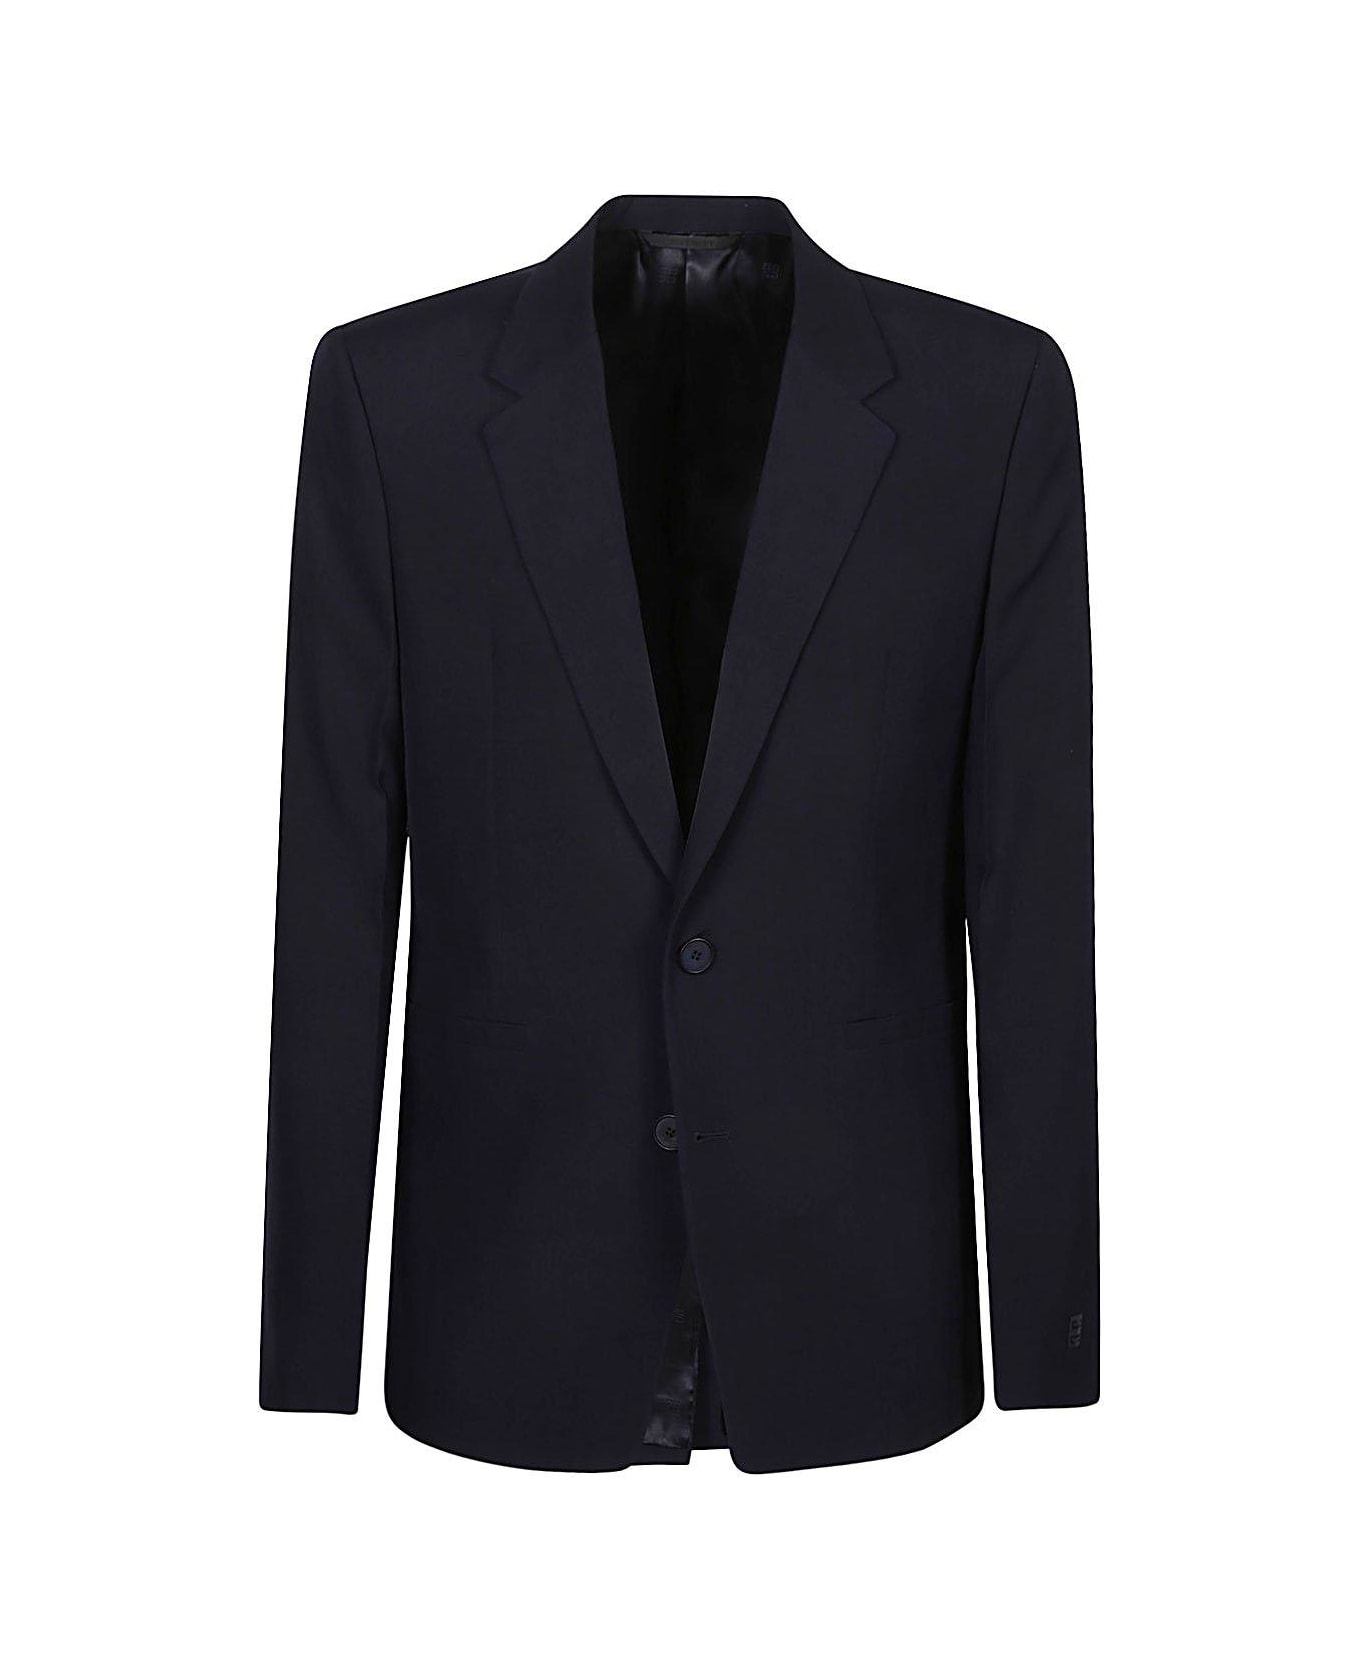 Givenchy granulado Slim-fit Buttoned Jacket - NAVY